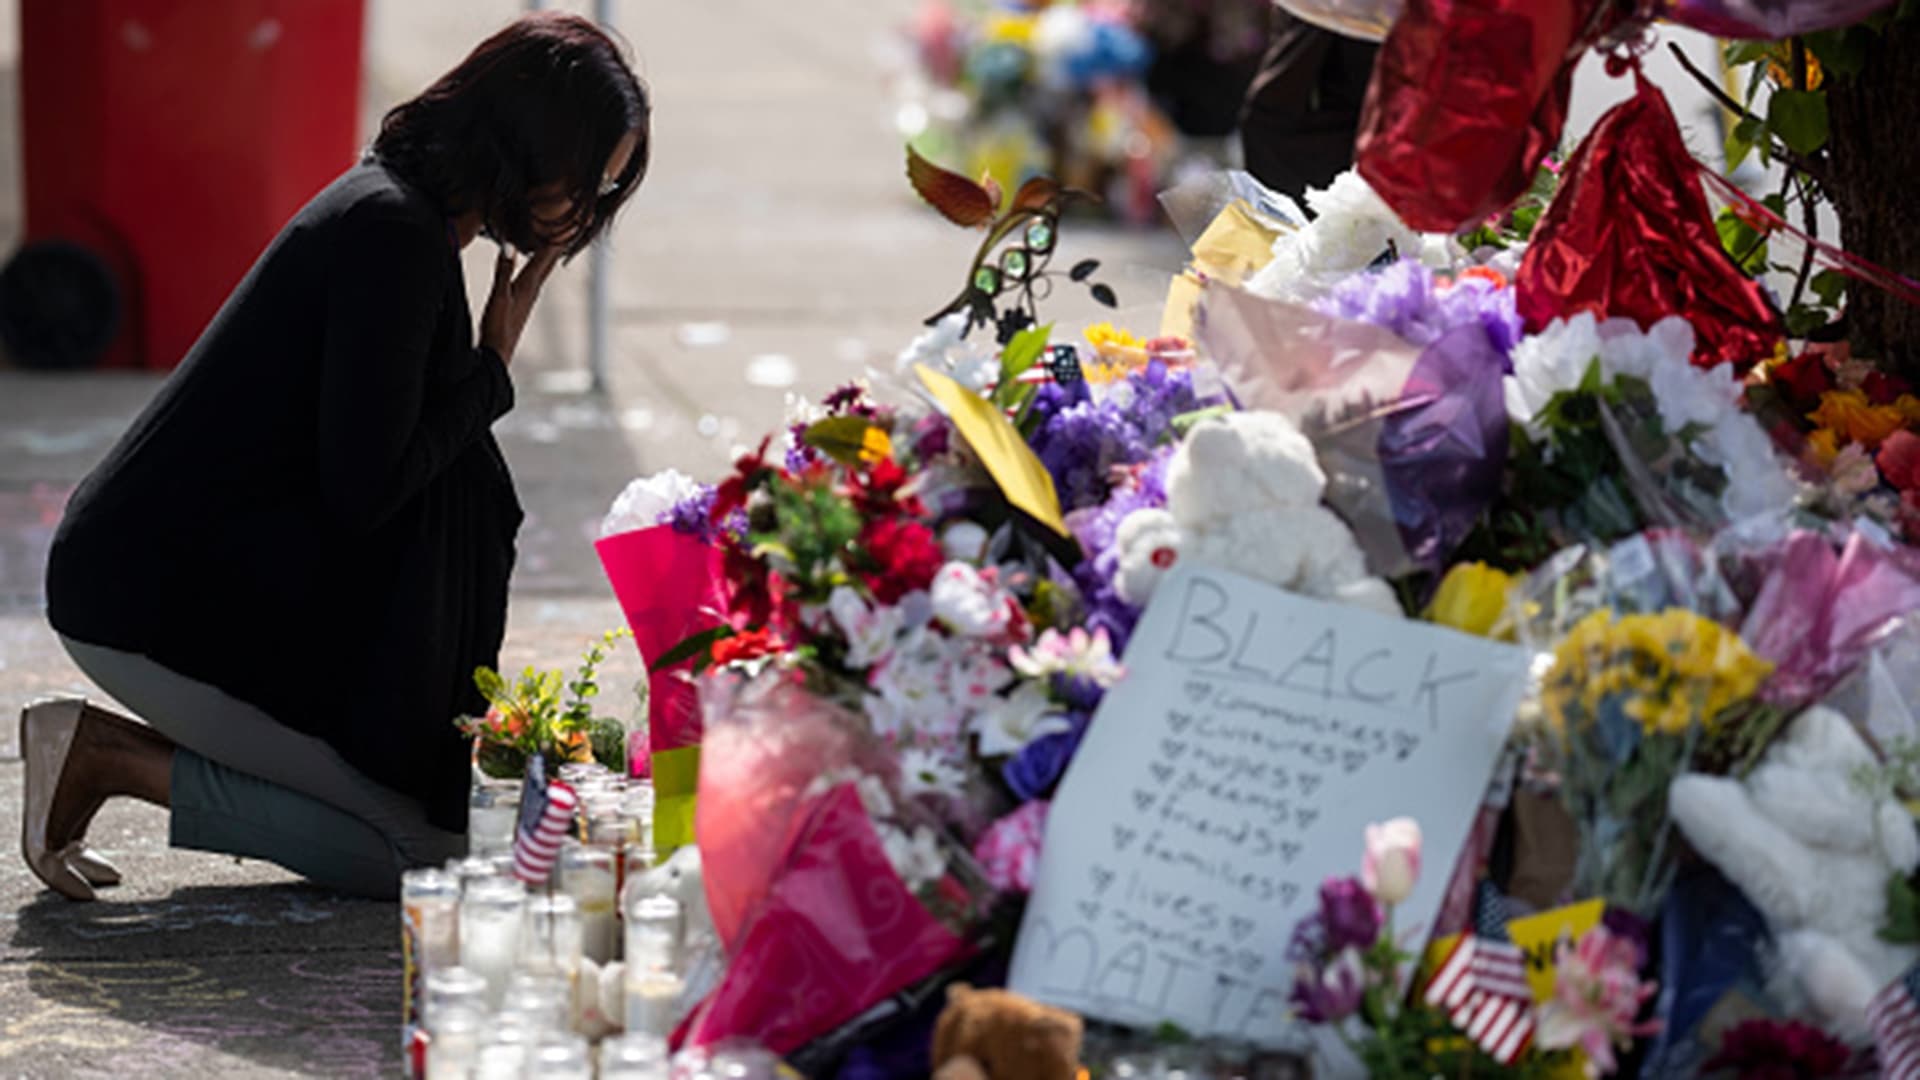 Mourner kneels in front of flowers to pay respects after Buffalo shootings